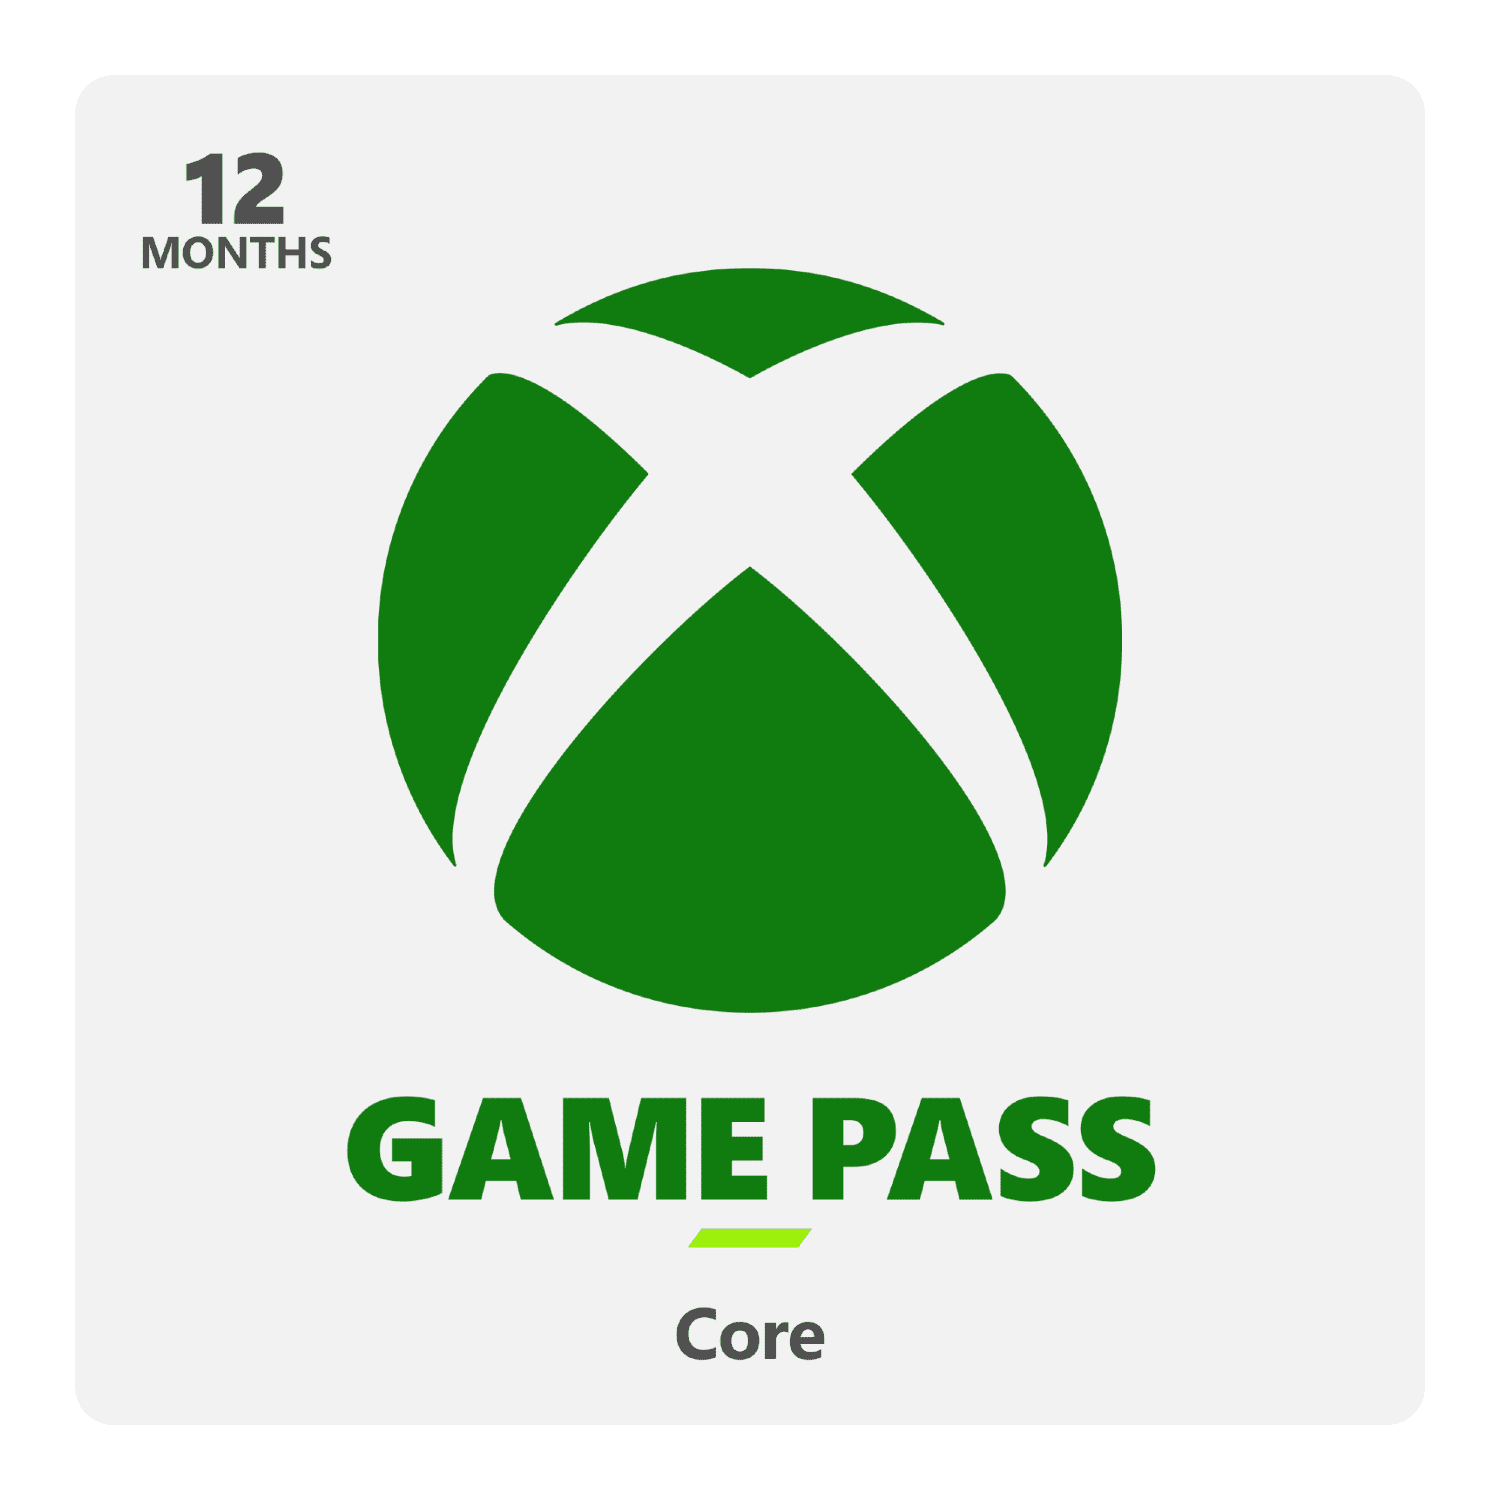 Xbox Game Pass Core - Official Overview: Game Pass Community Update Video 